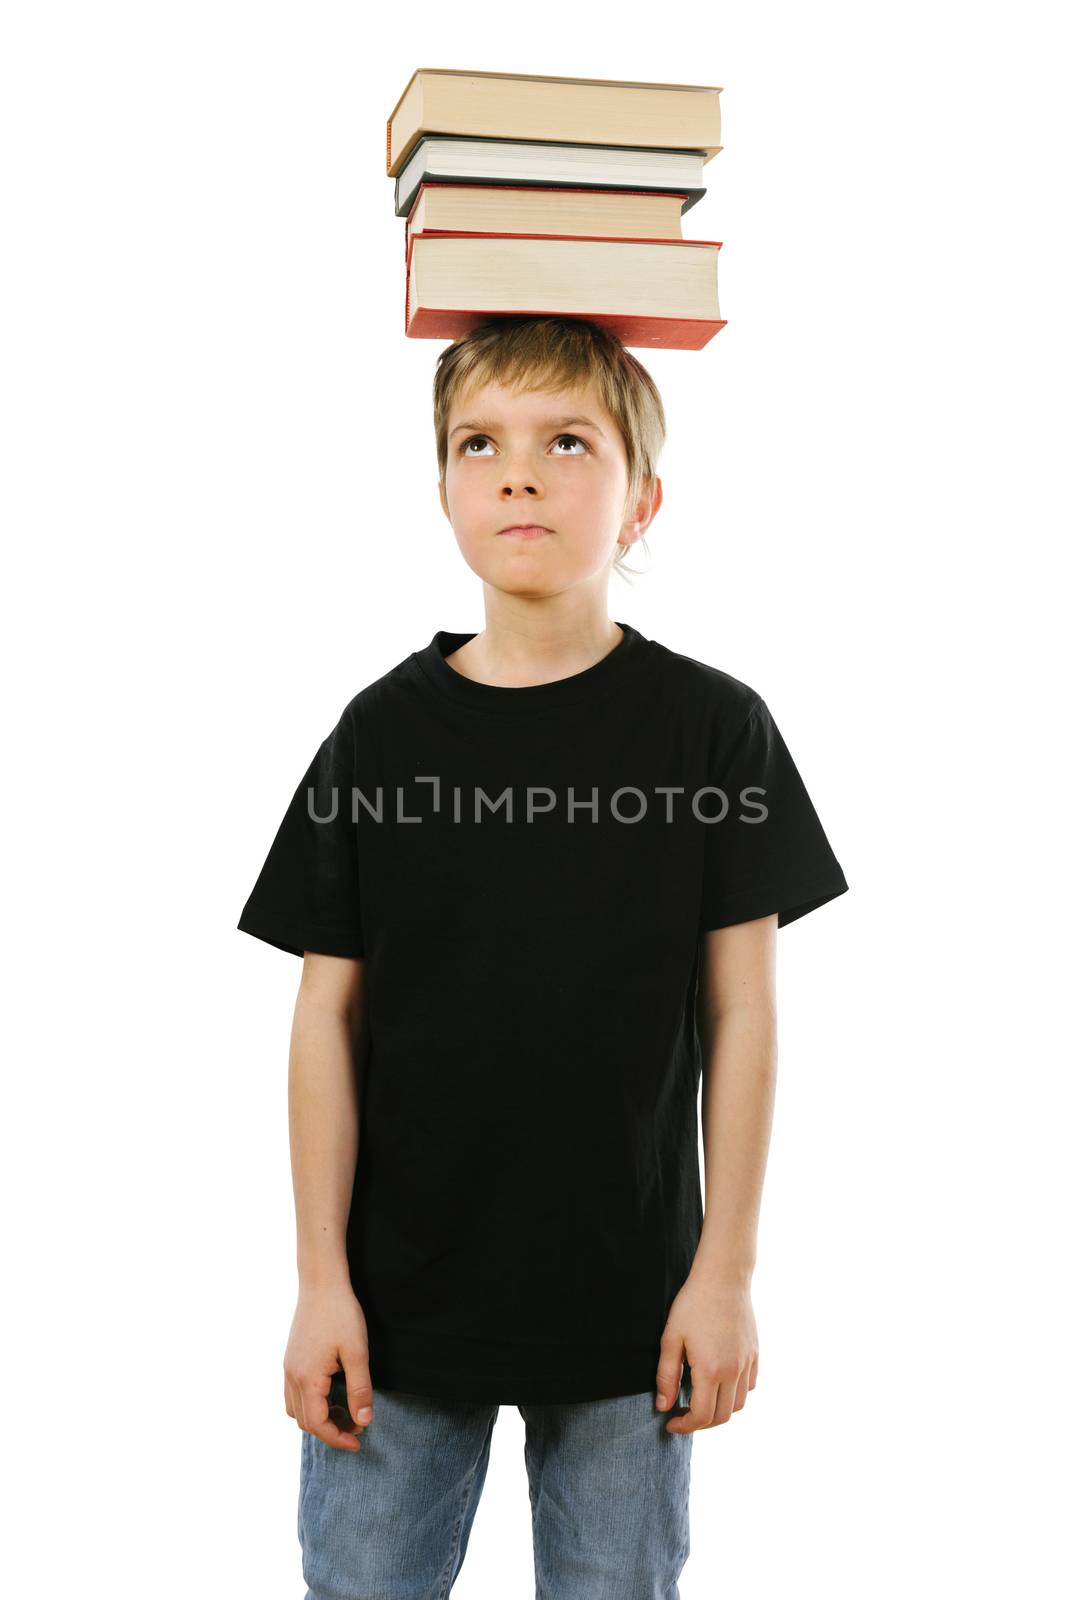 Boy balancing books on his head by sumners